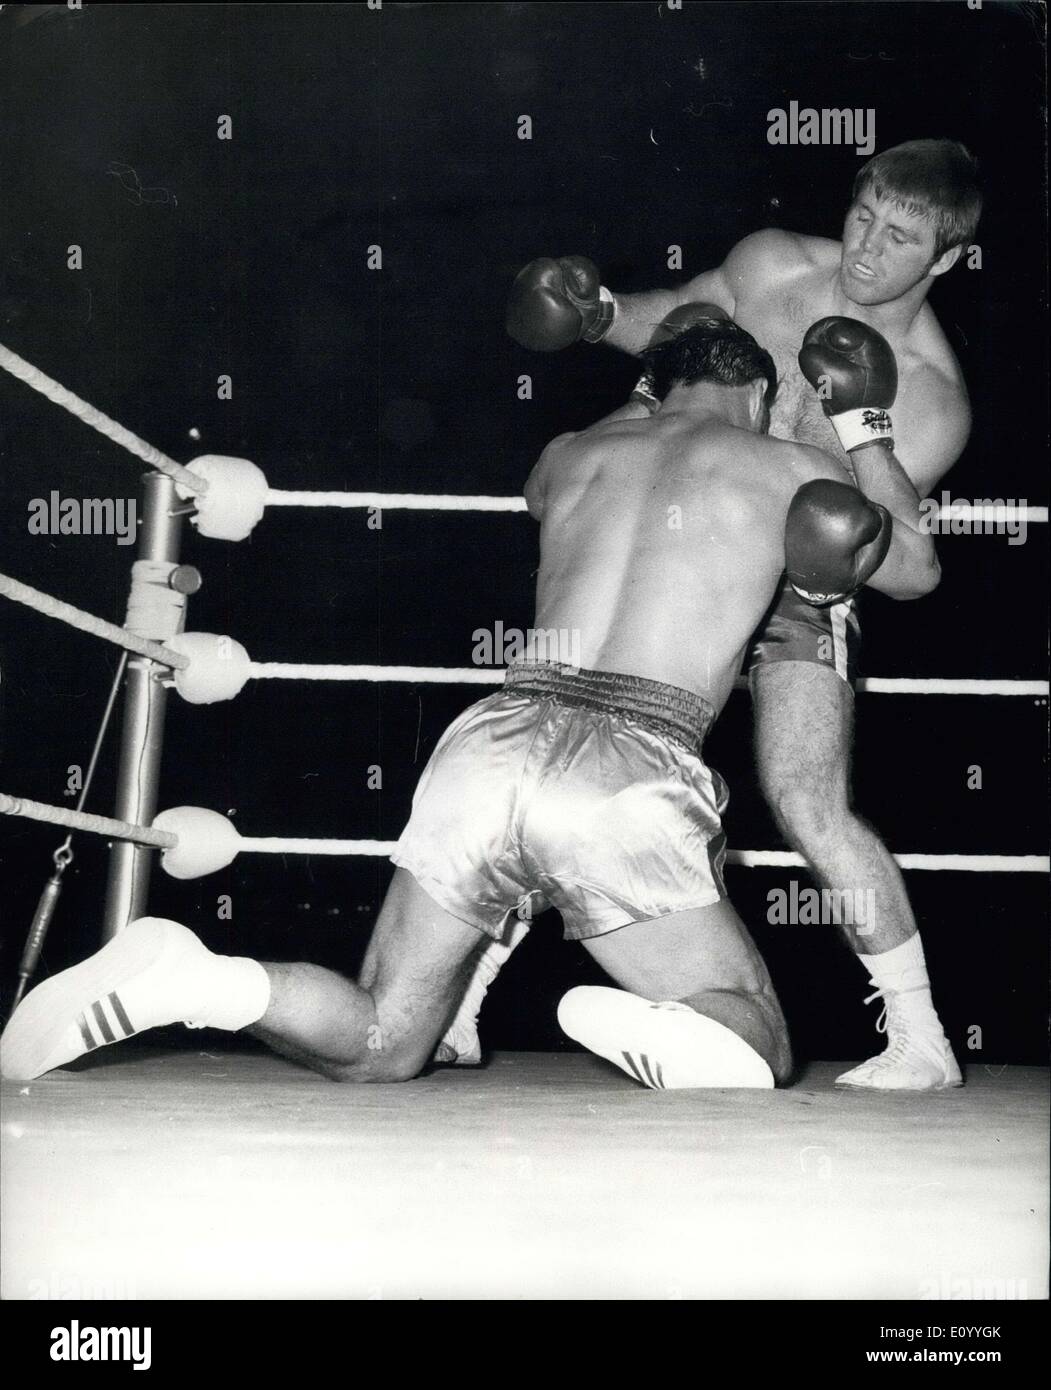 Nov. 17, 1971 - Jack Bodell knocked out in 64 seconds. Jack Bodell, the British, European and Commonwealth heavyweight champion, was beaten in 64 seconds at Wembley last night when he was knocked out by American Jerry Quarry in a non-title fight scheduled for ten rounds. Photo Shows: Jack Bodell (back to camera) begins to slide to the canvas after Jerry Quarry had landed the punch which finished the fight after 64 seconds of the first round. H/Keystone Stock Photo